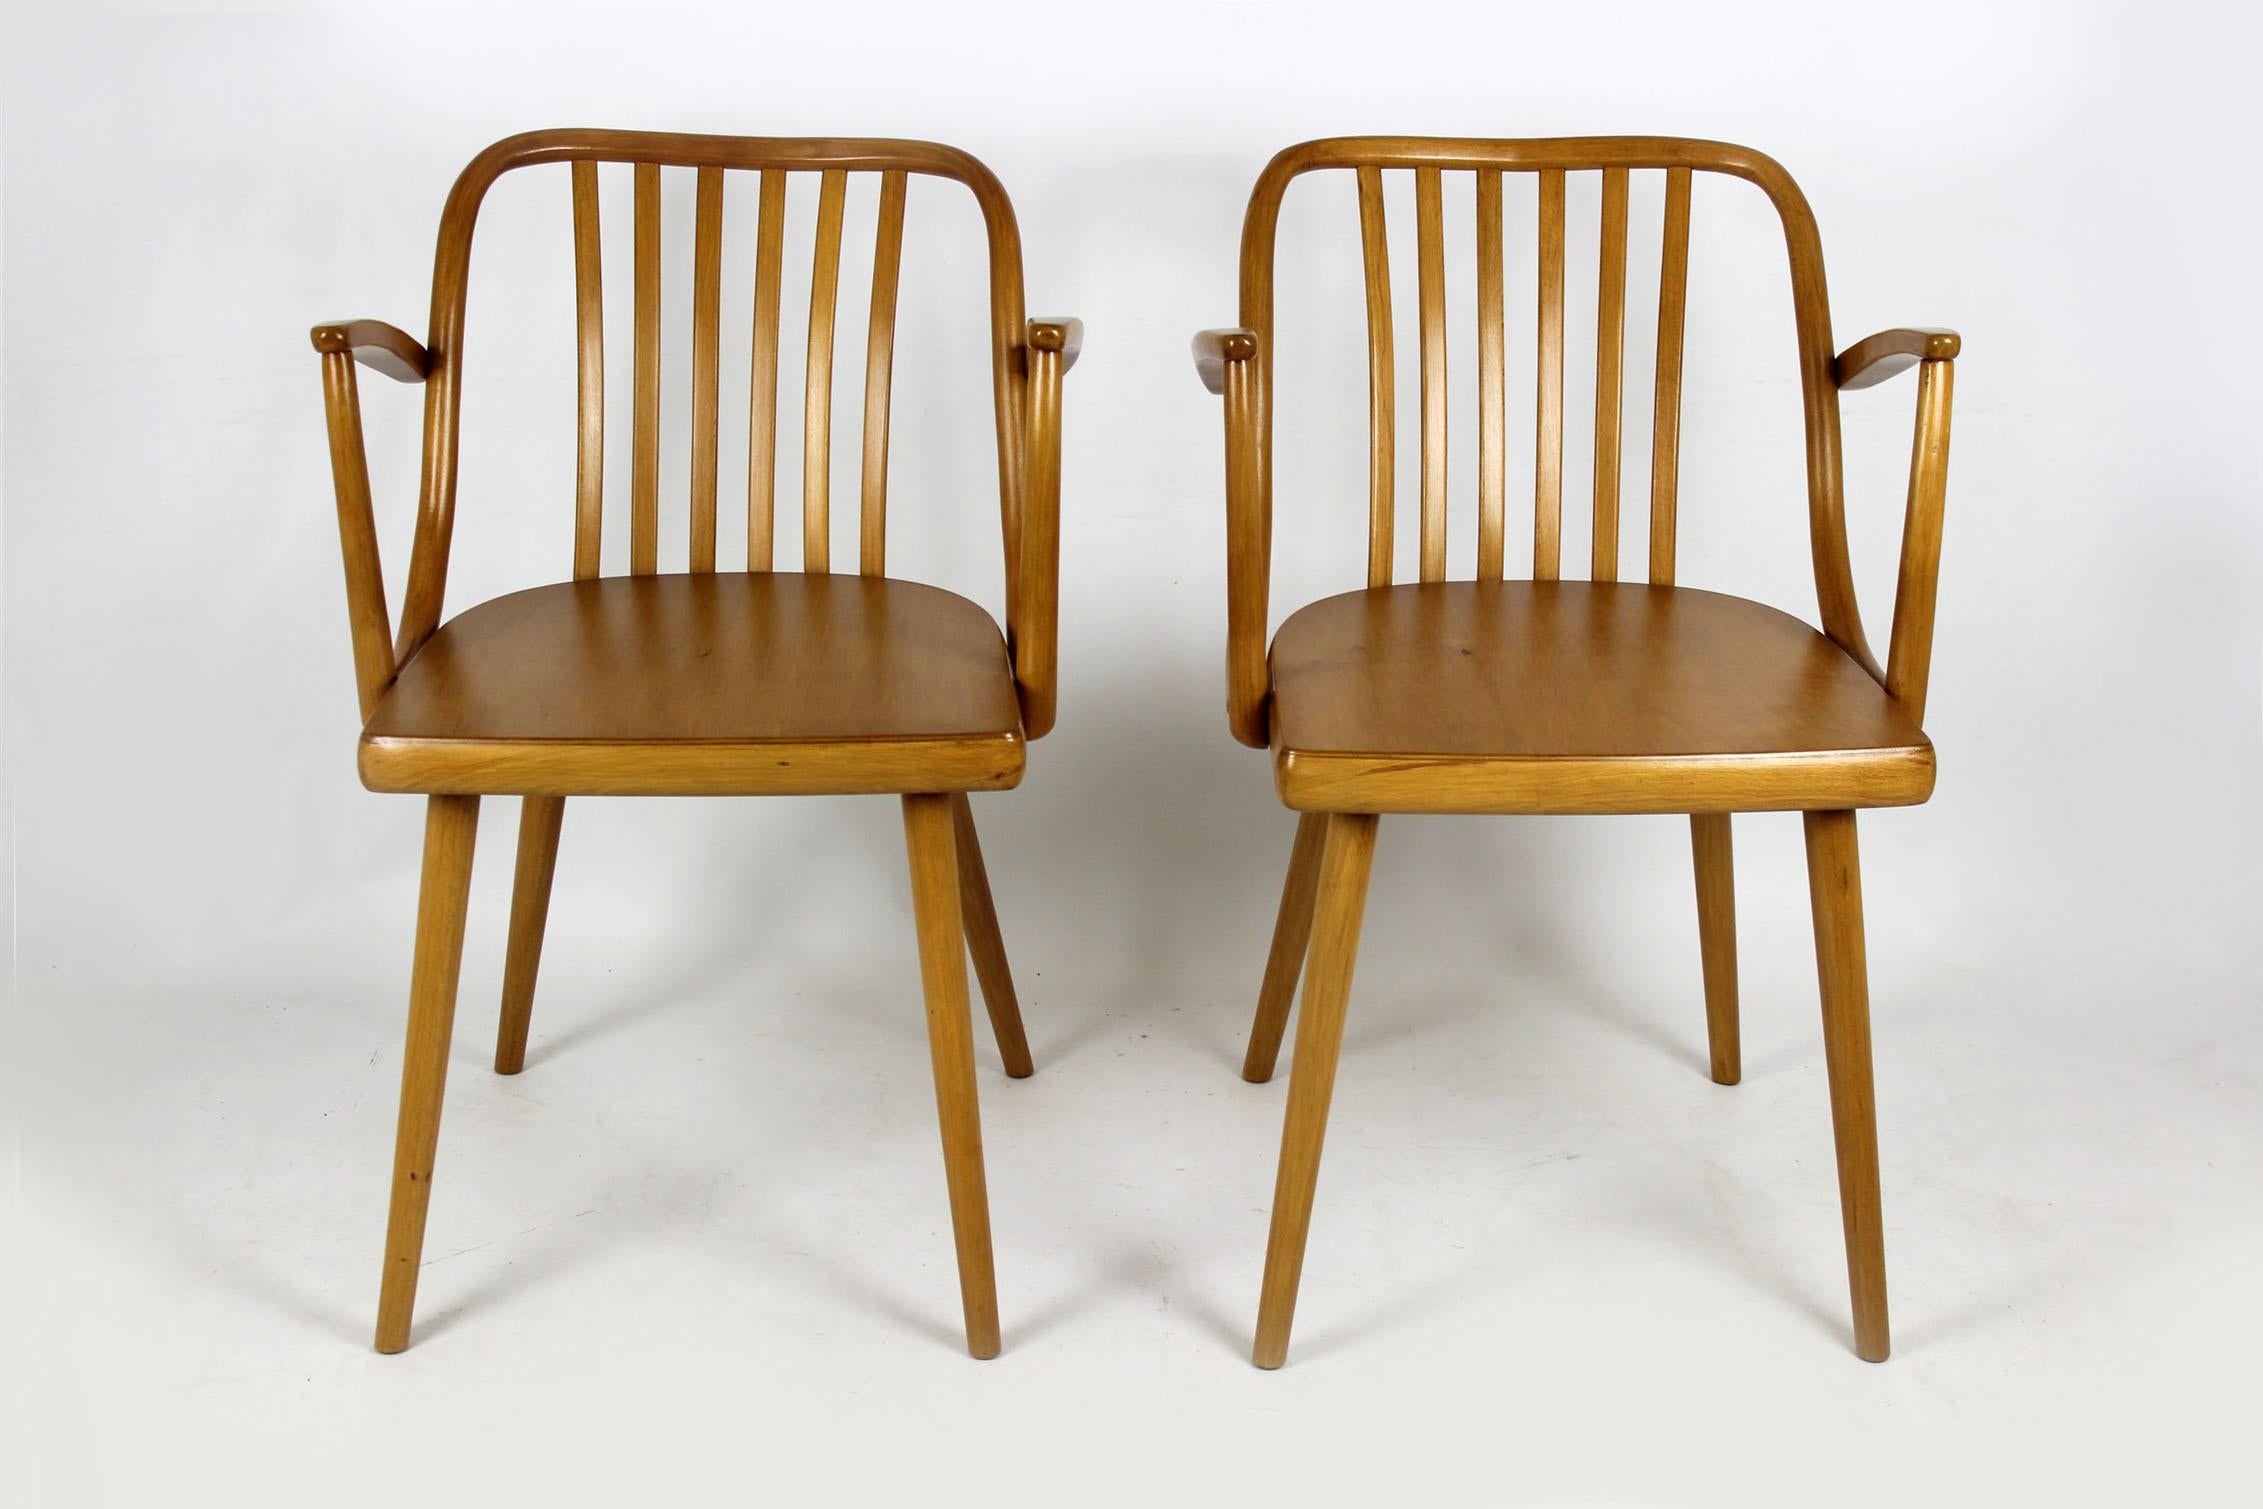 Set of two wooden armchairs designed by Antonin Suman for Ton in the mid-1960s. Backrests made of bent beechwood. Chairs have been completely restored.